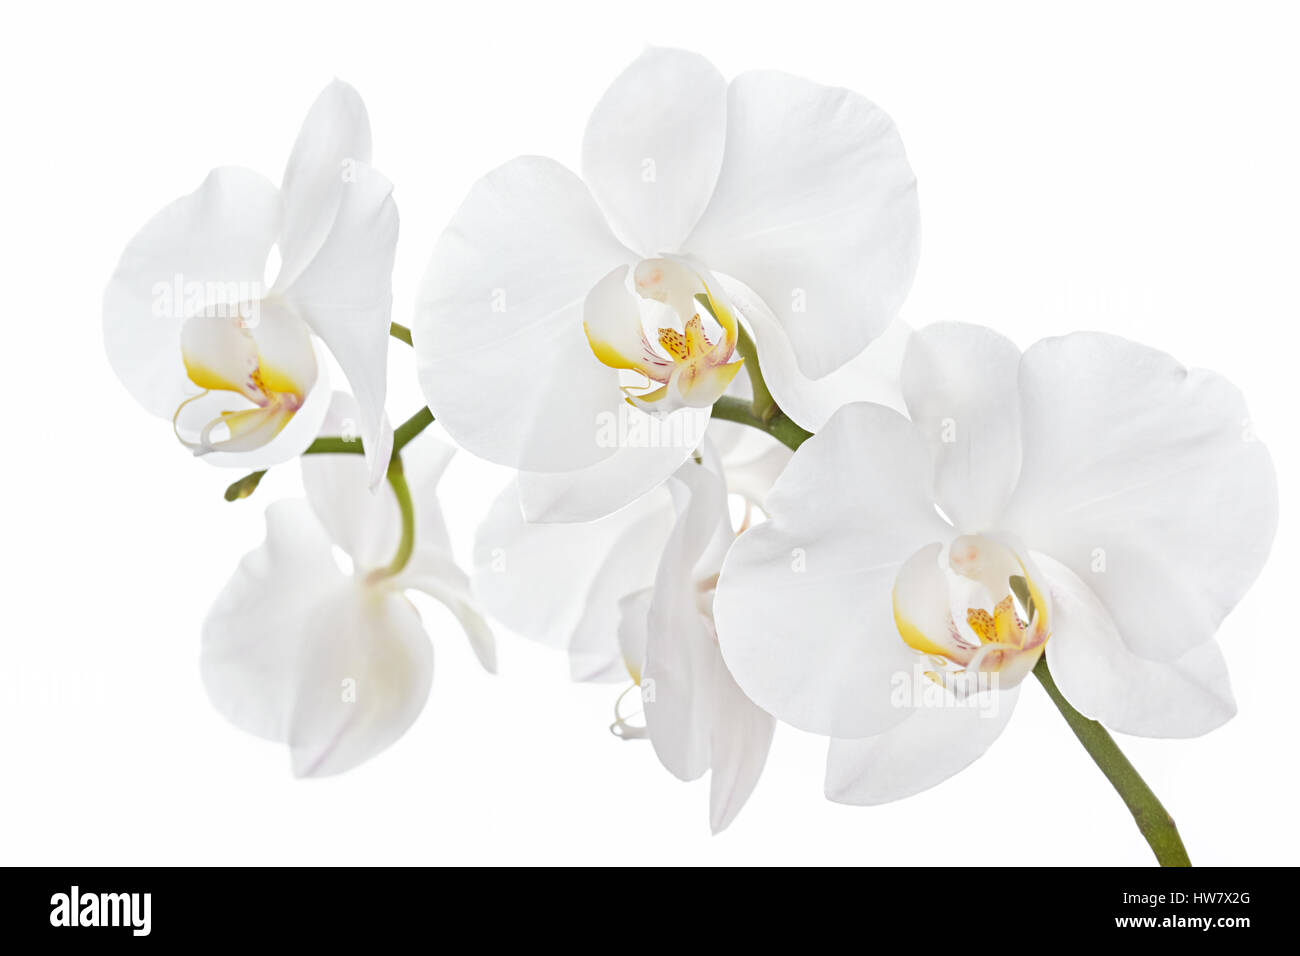 The branch of orchids on a white background Stock Photo